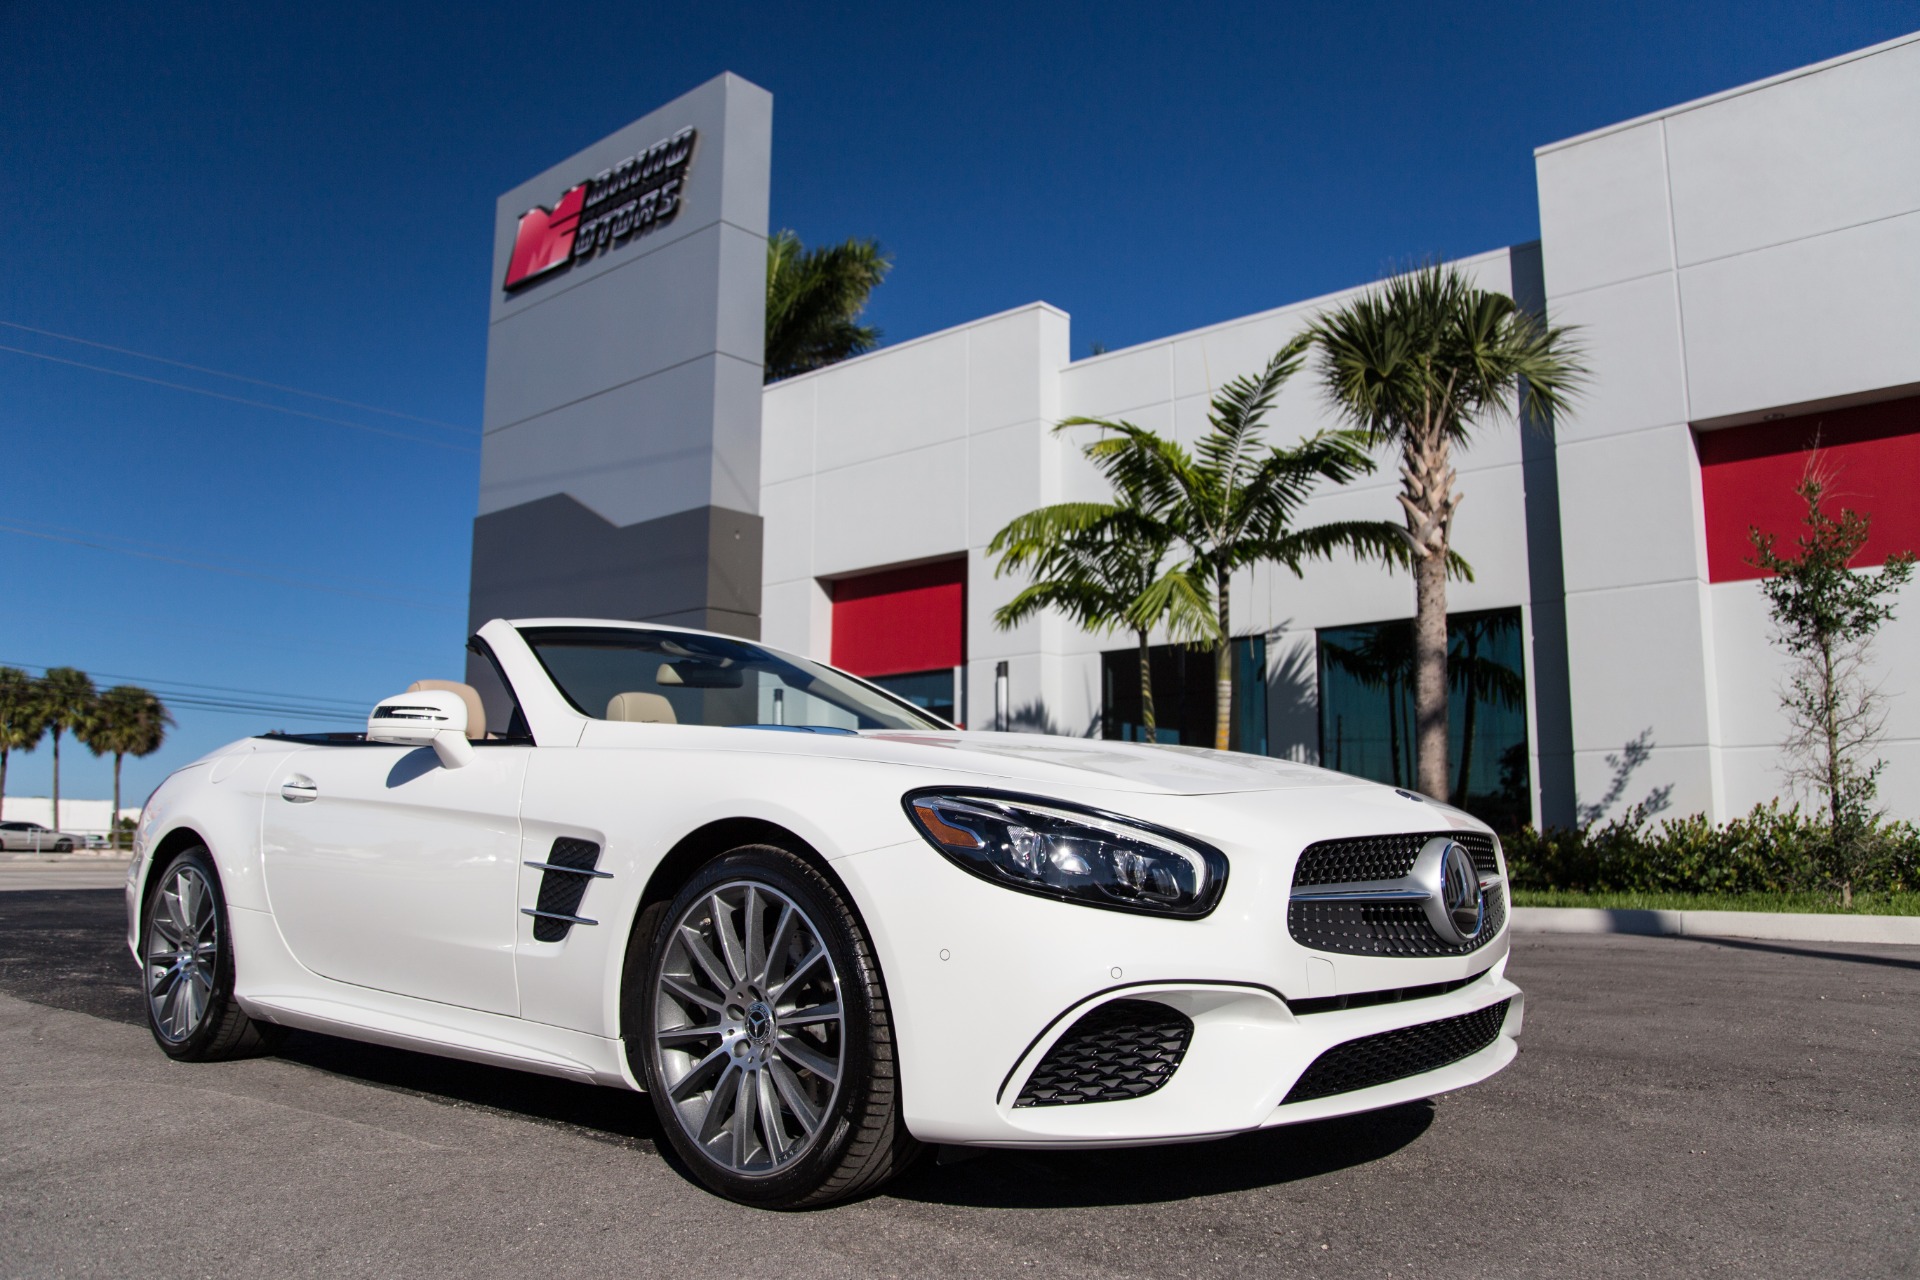 Used 2017 Mercedes Benz Sl Class Sl 450 For Sale 74 900